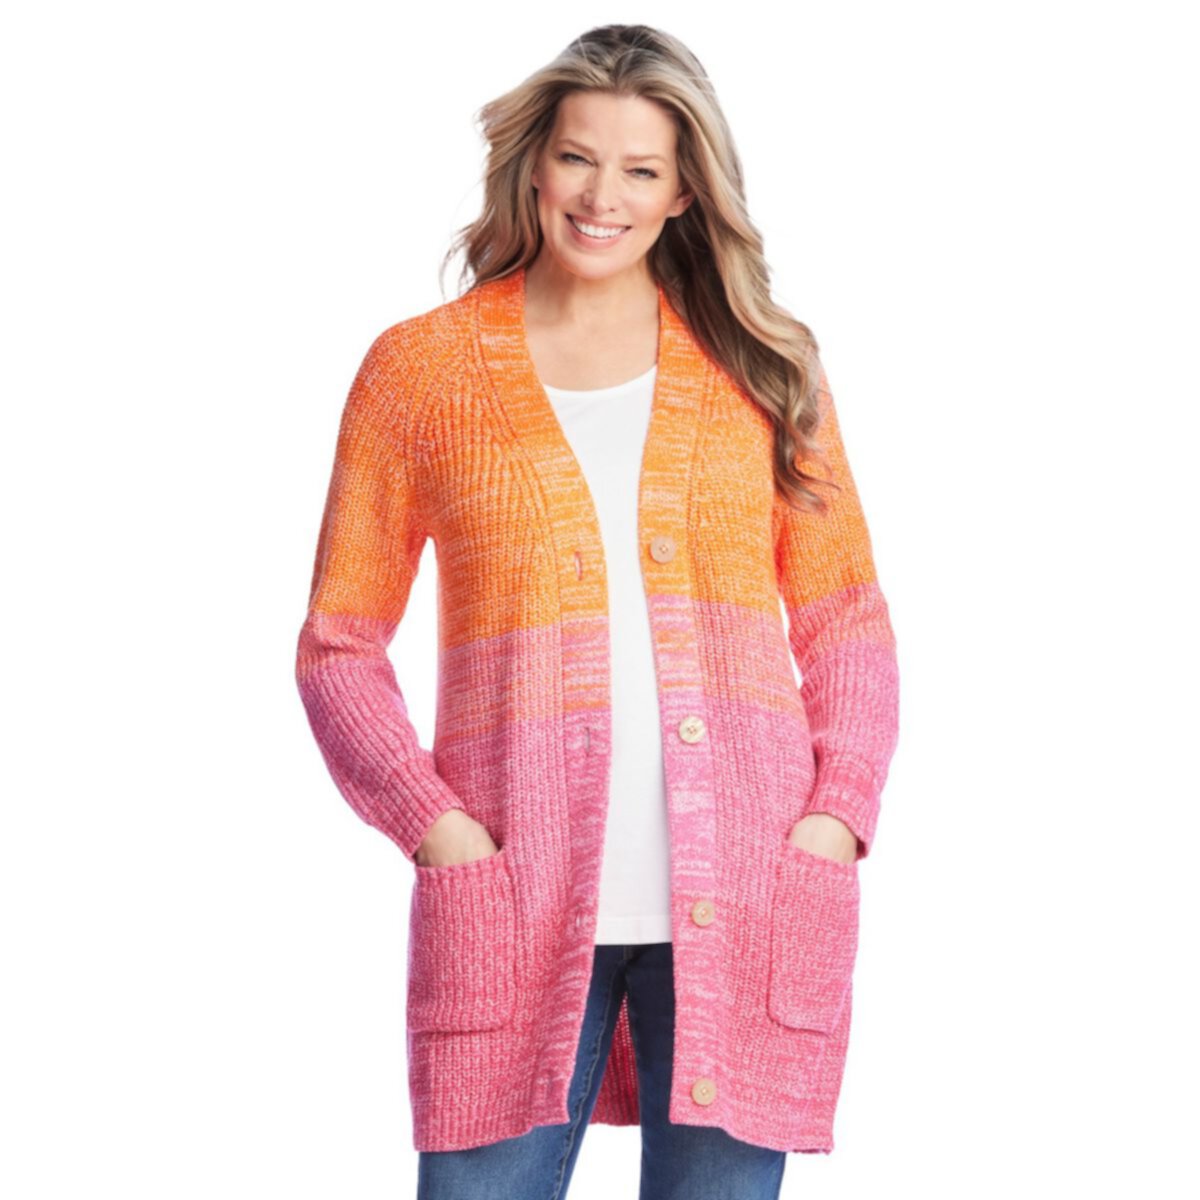 Woman Within Women's Plus Size Ombre Shaker Cardigan Woman Within